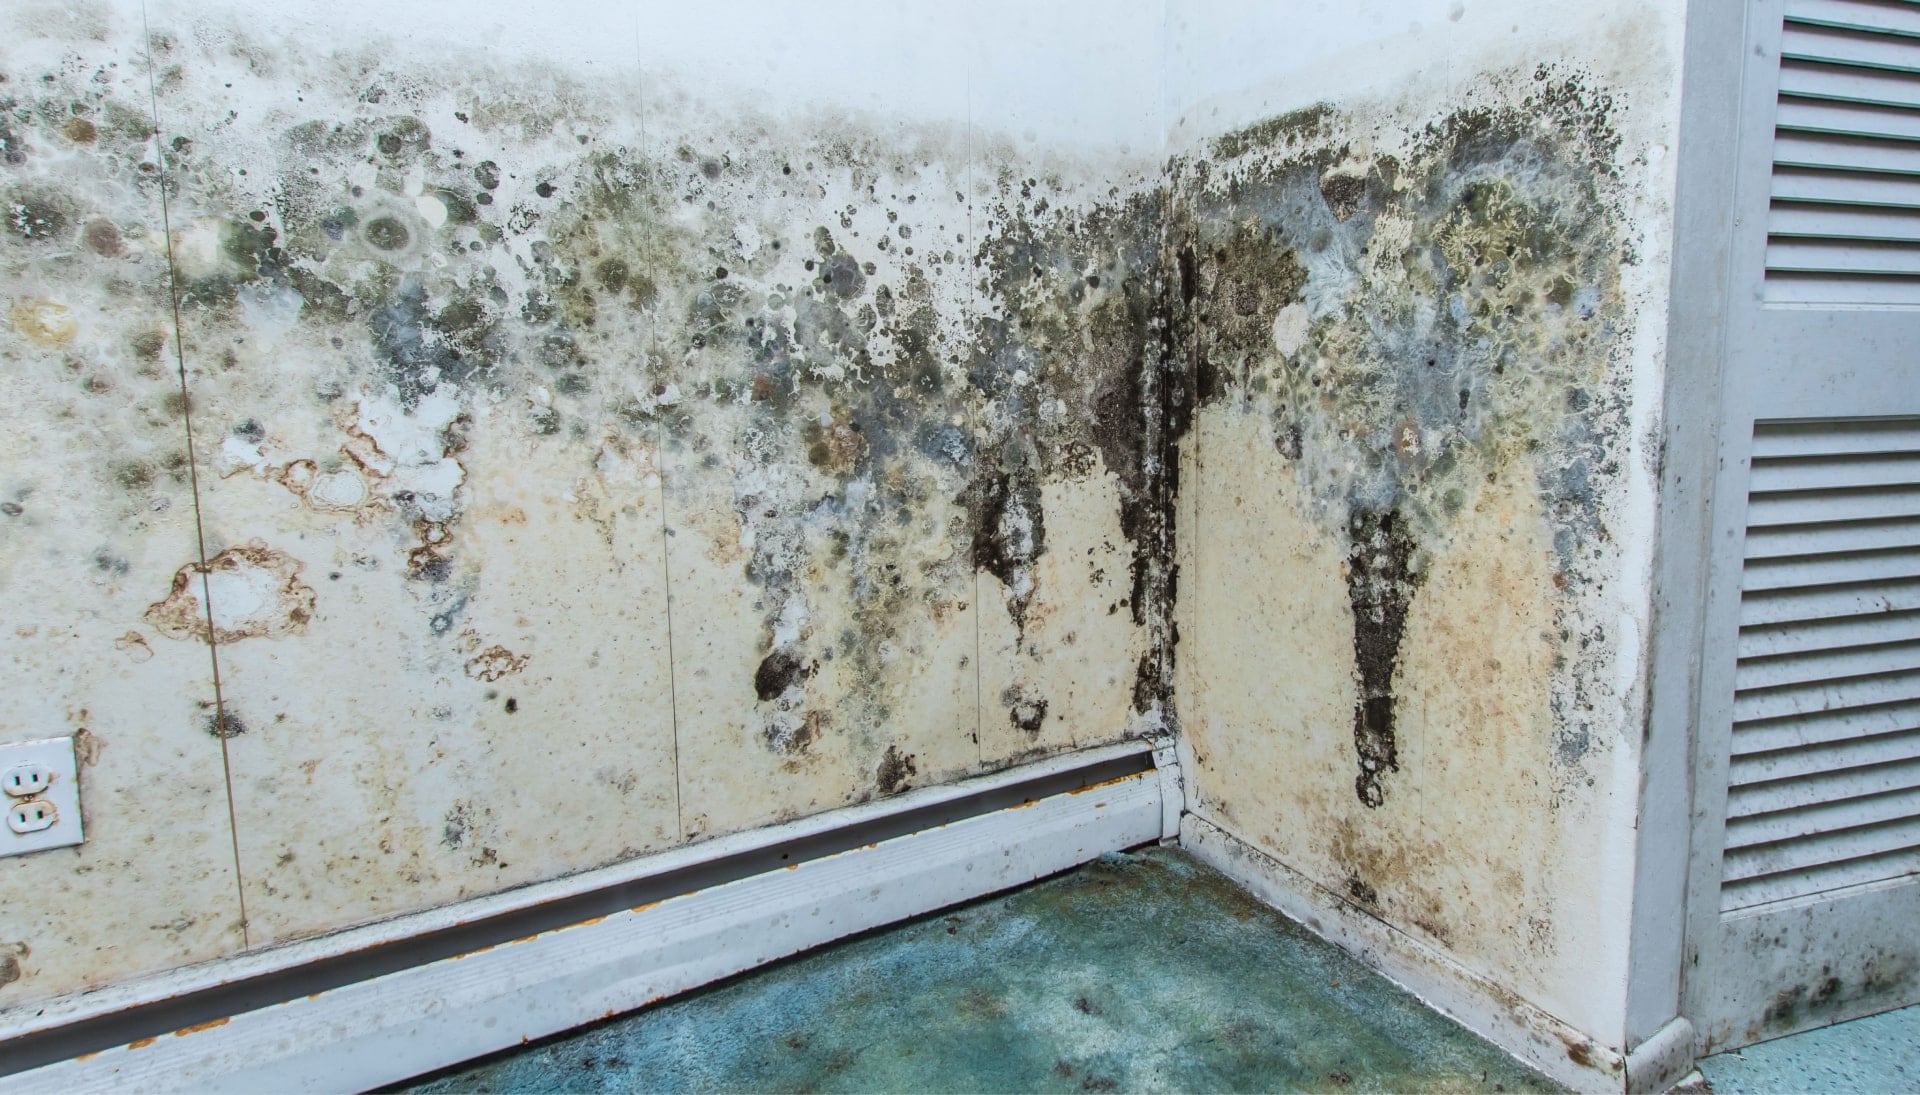 Professional mold removal, odor control, and water damage restoration service in Wilmington, North Carolina.